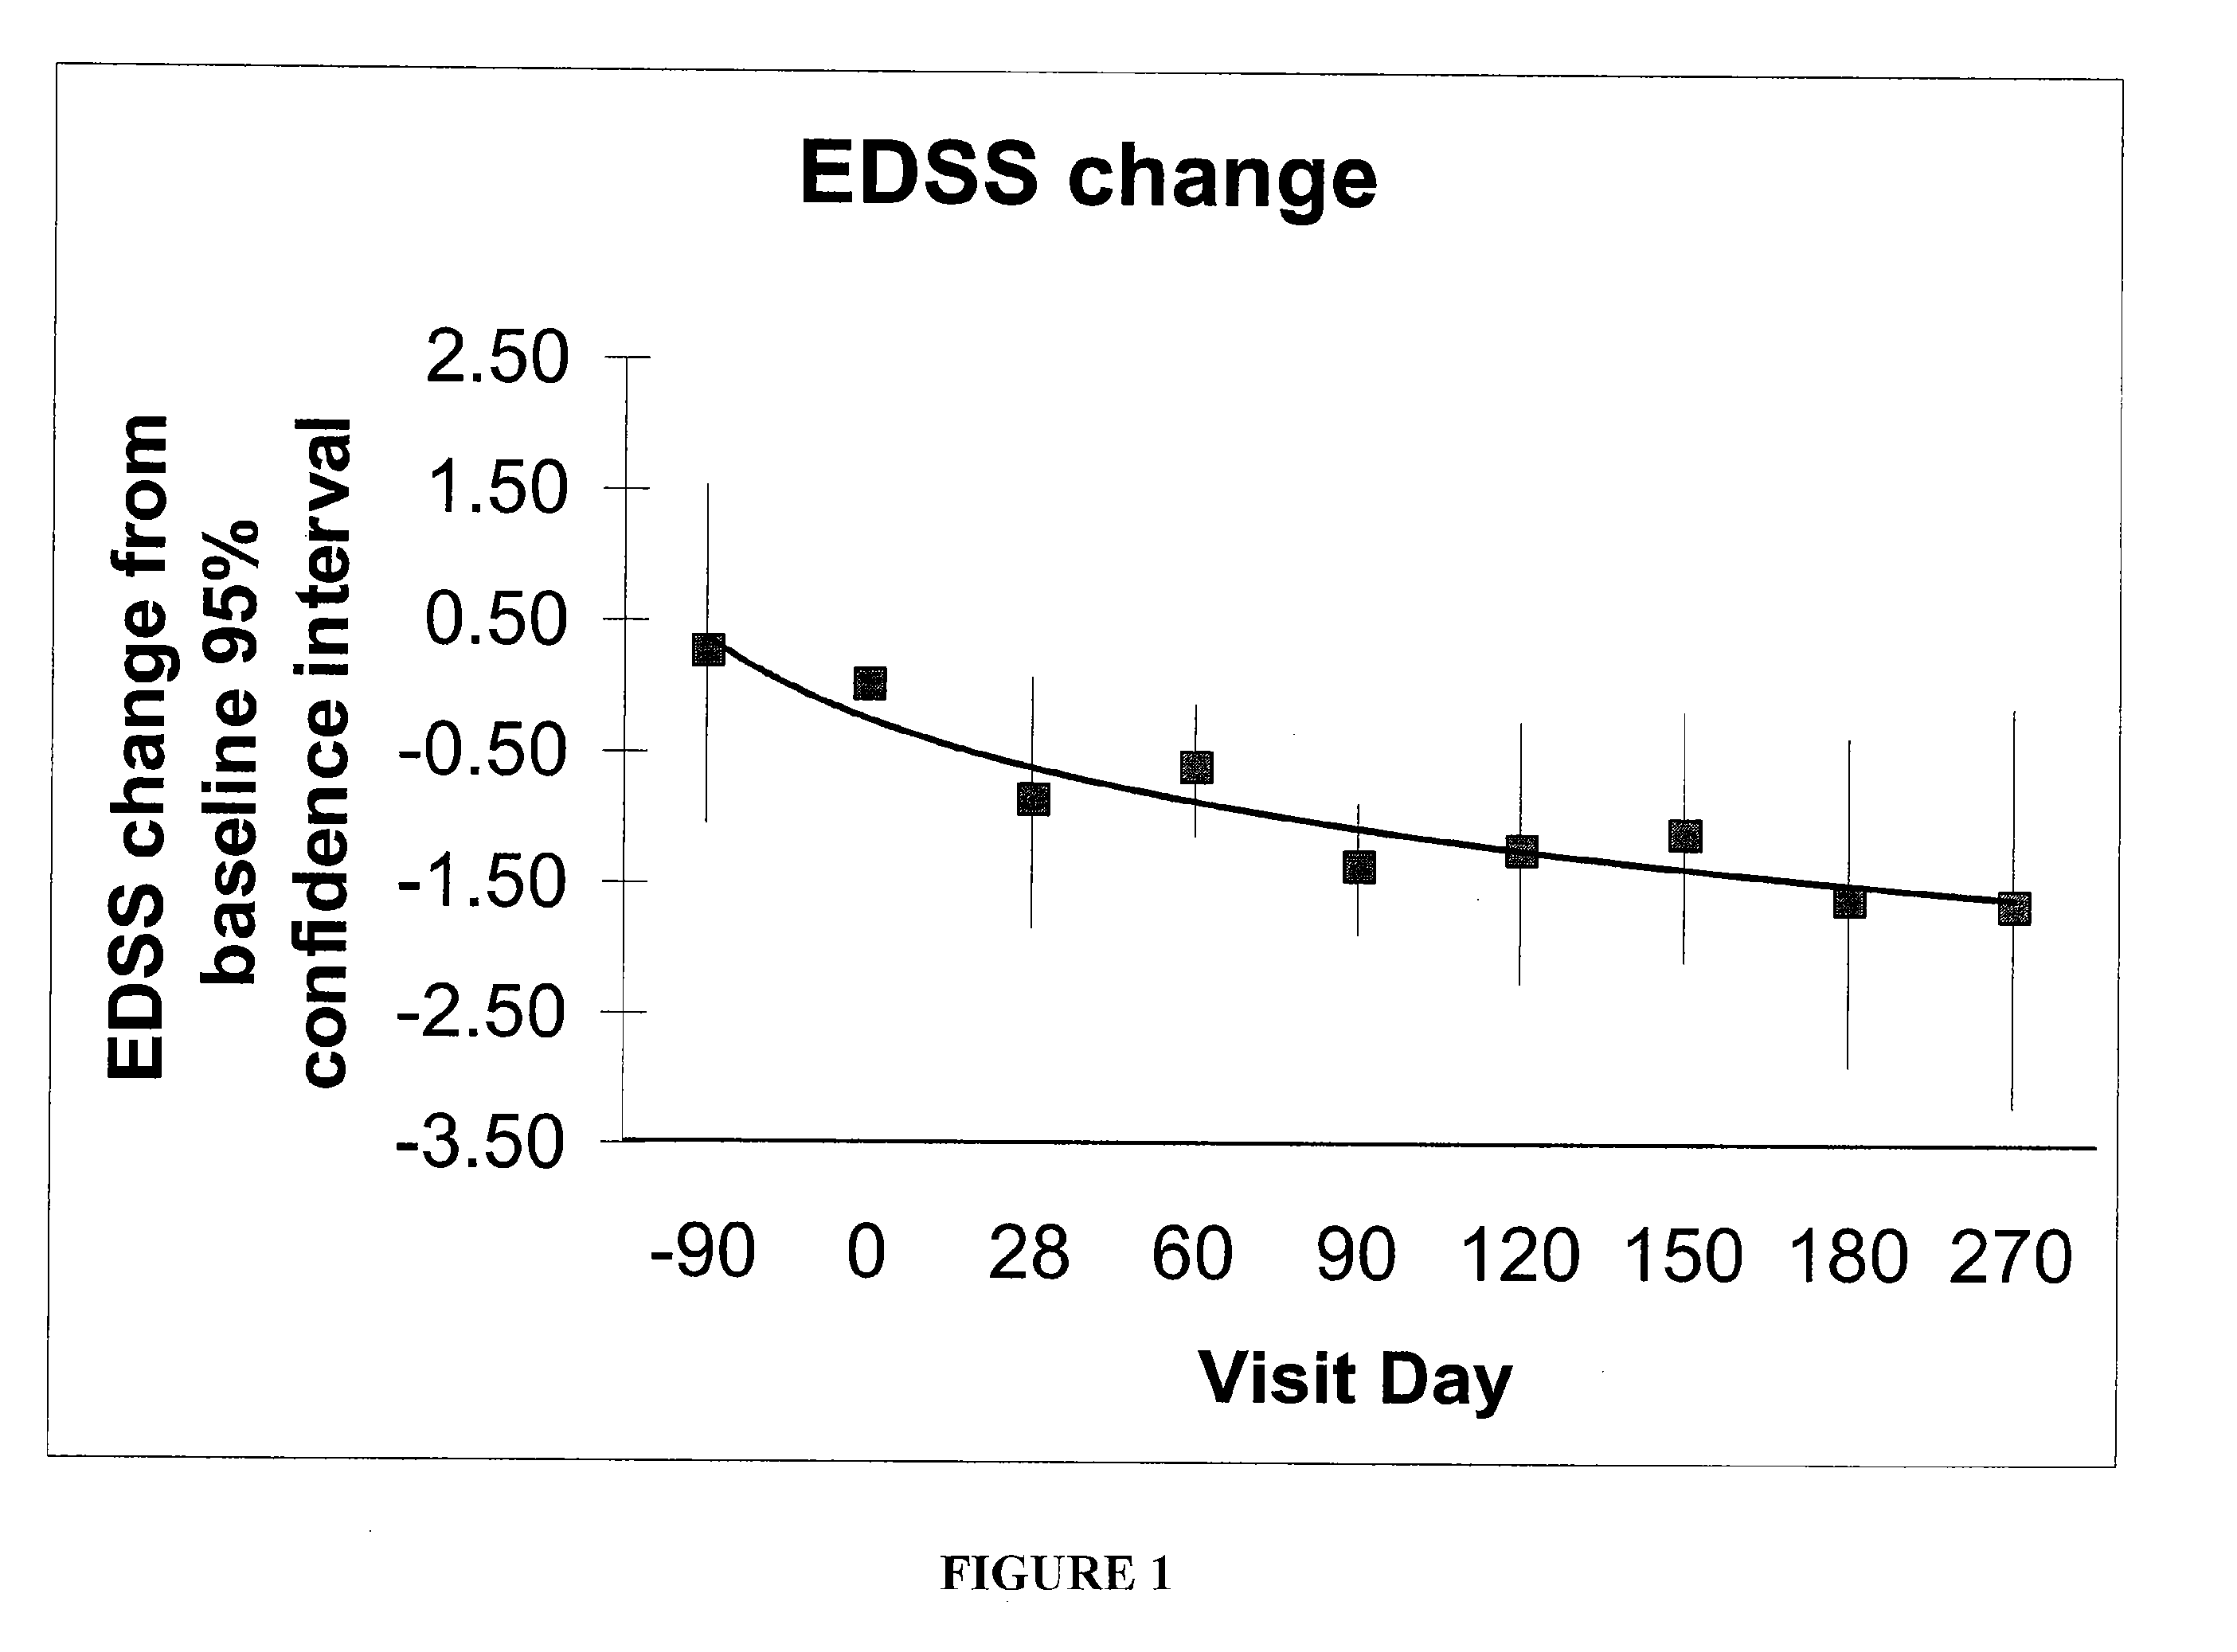 Method for treatment of demyelinating central nervous system disease